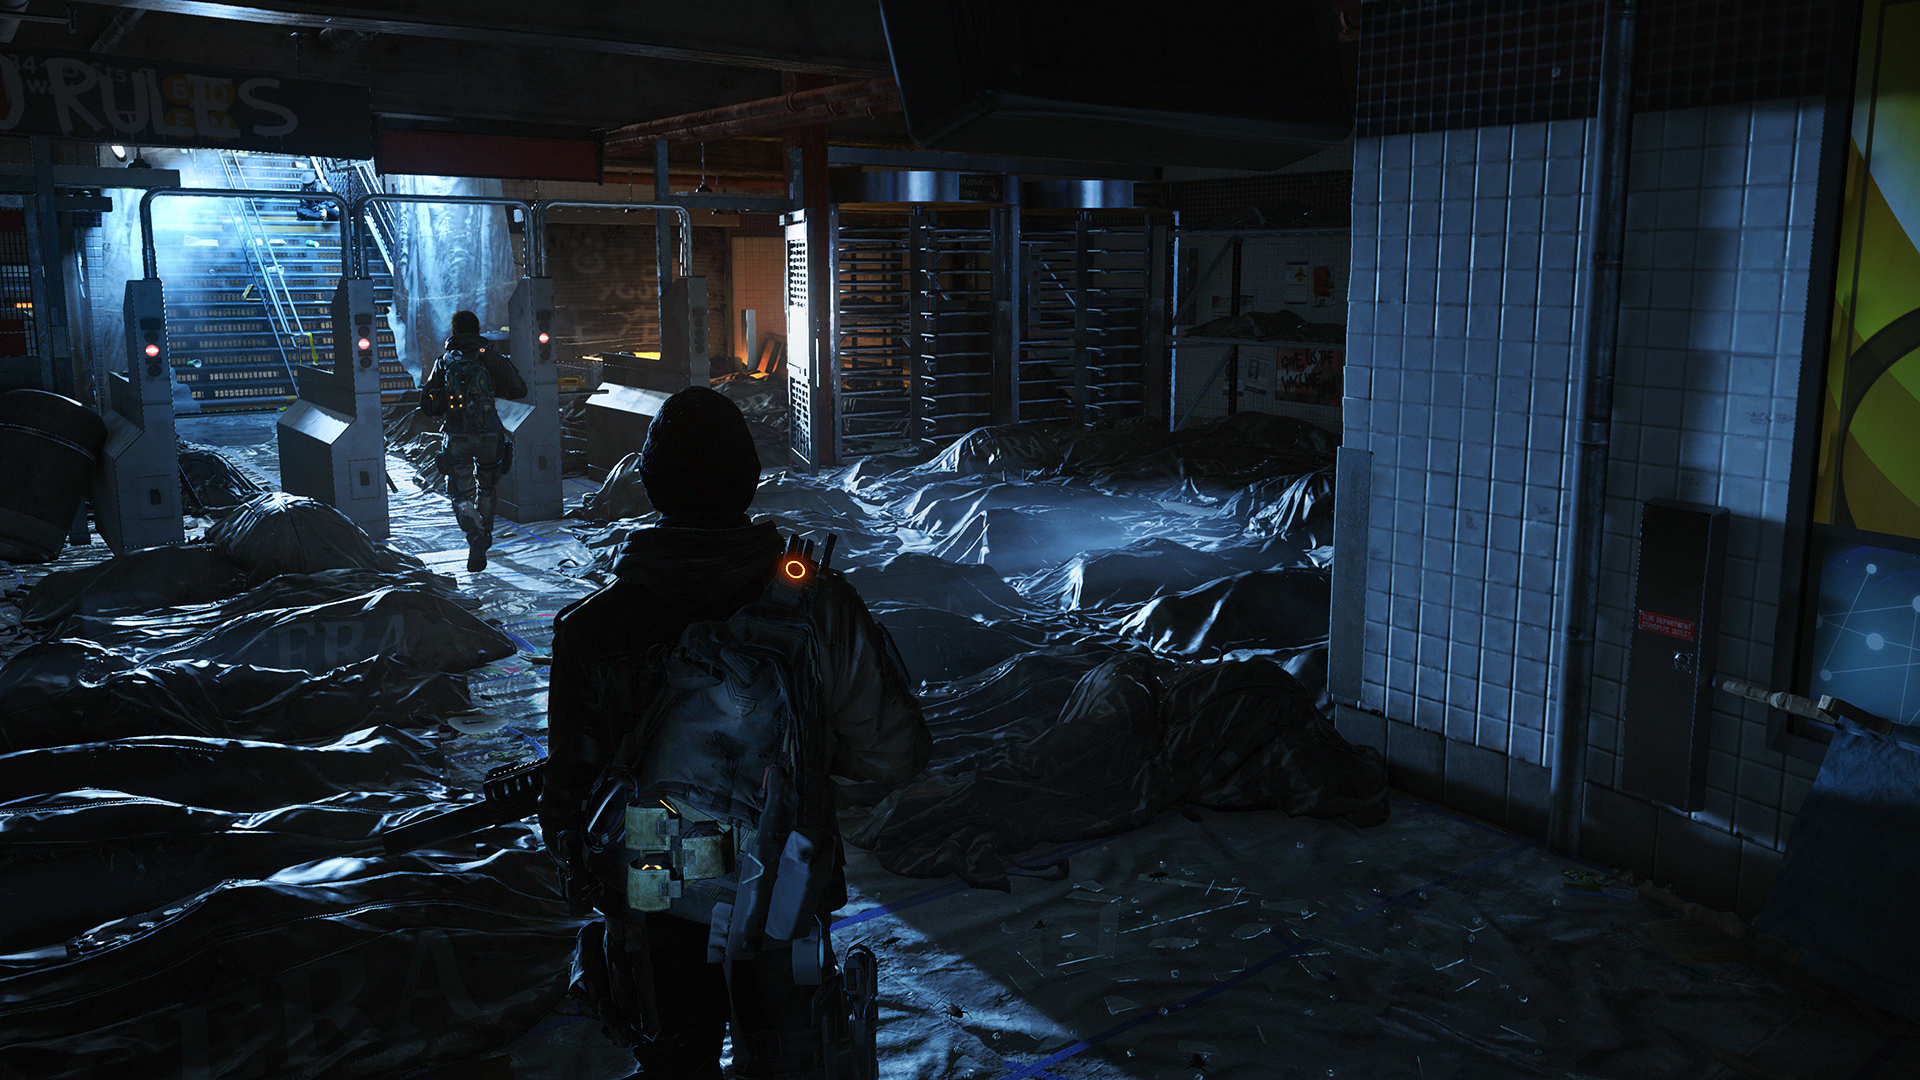 Tom Clancy's The Division #2